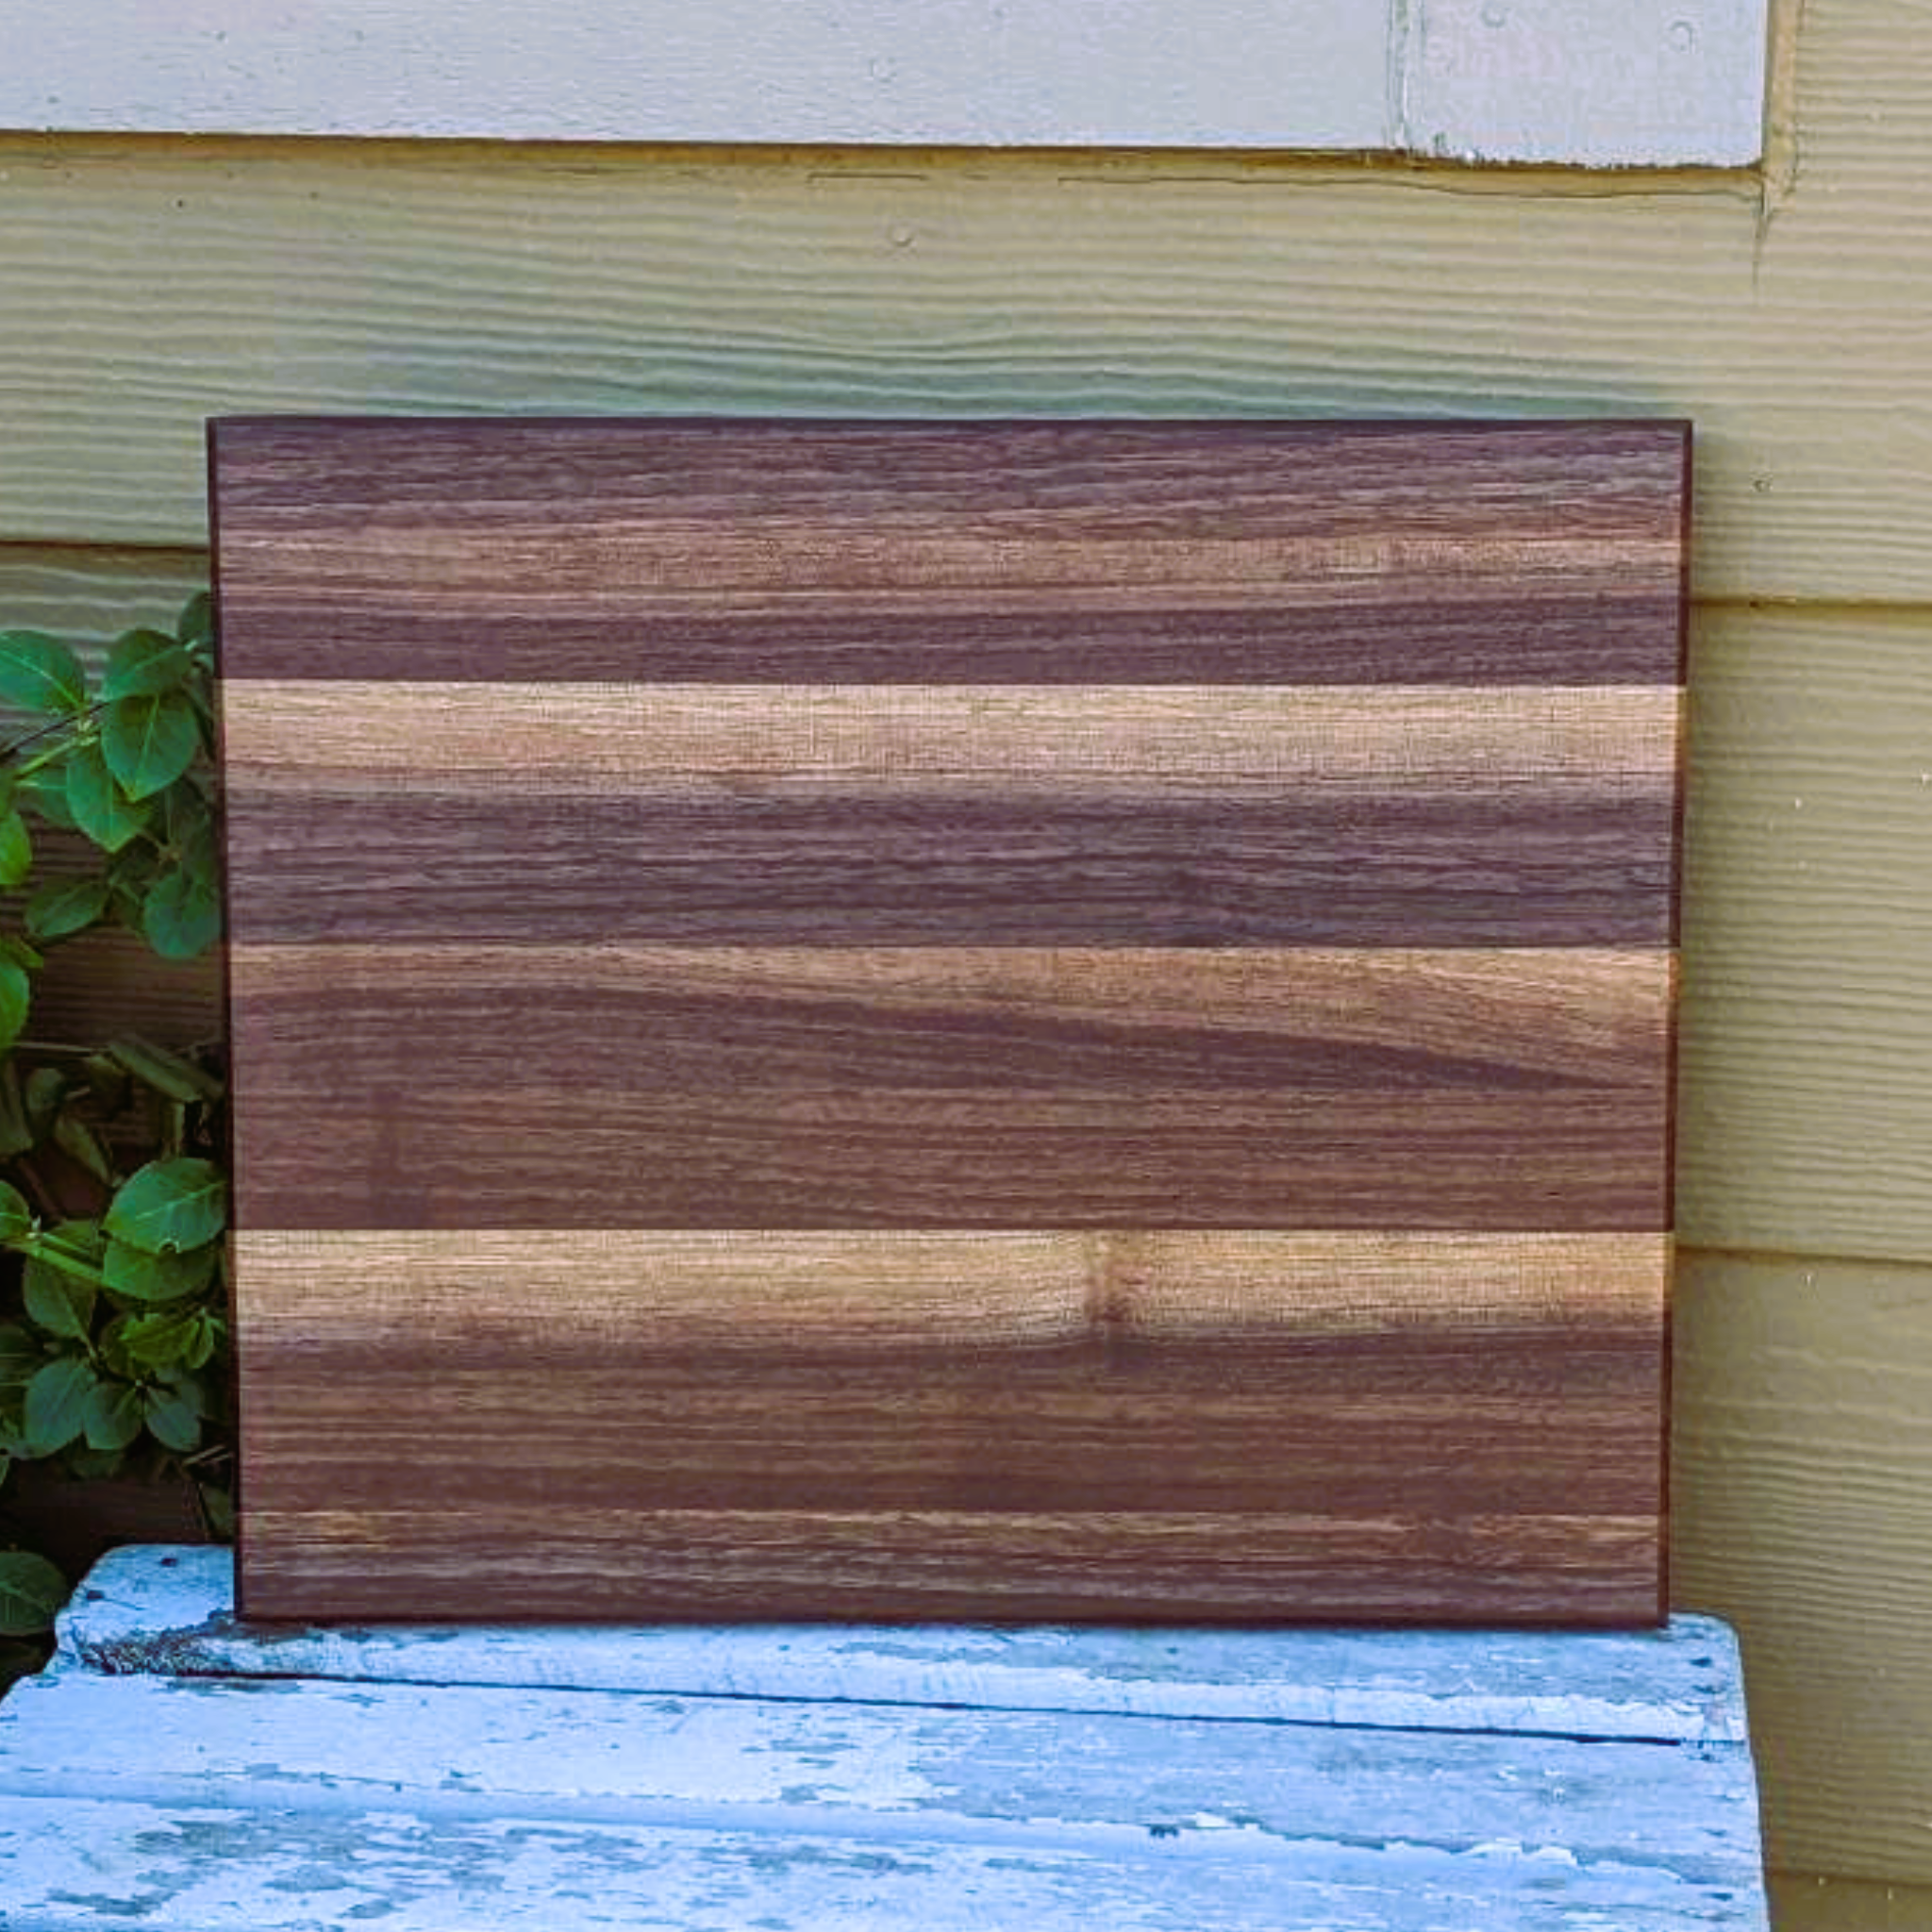 Black Walnut Edge Grain Cutting Board with Hand Grooves and Rubber Feet